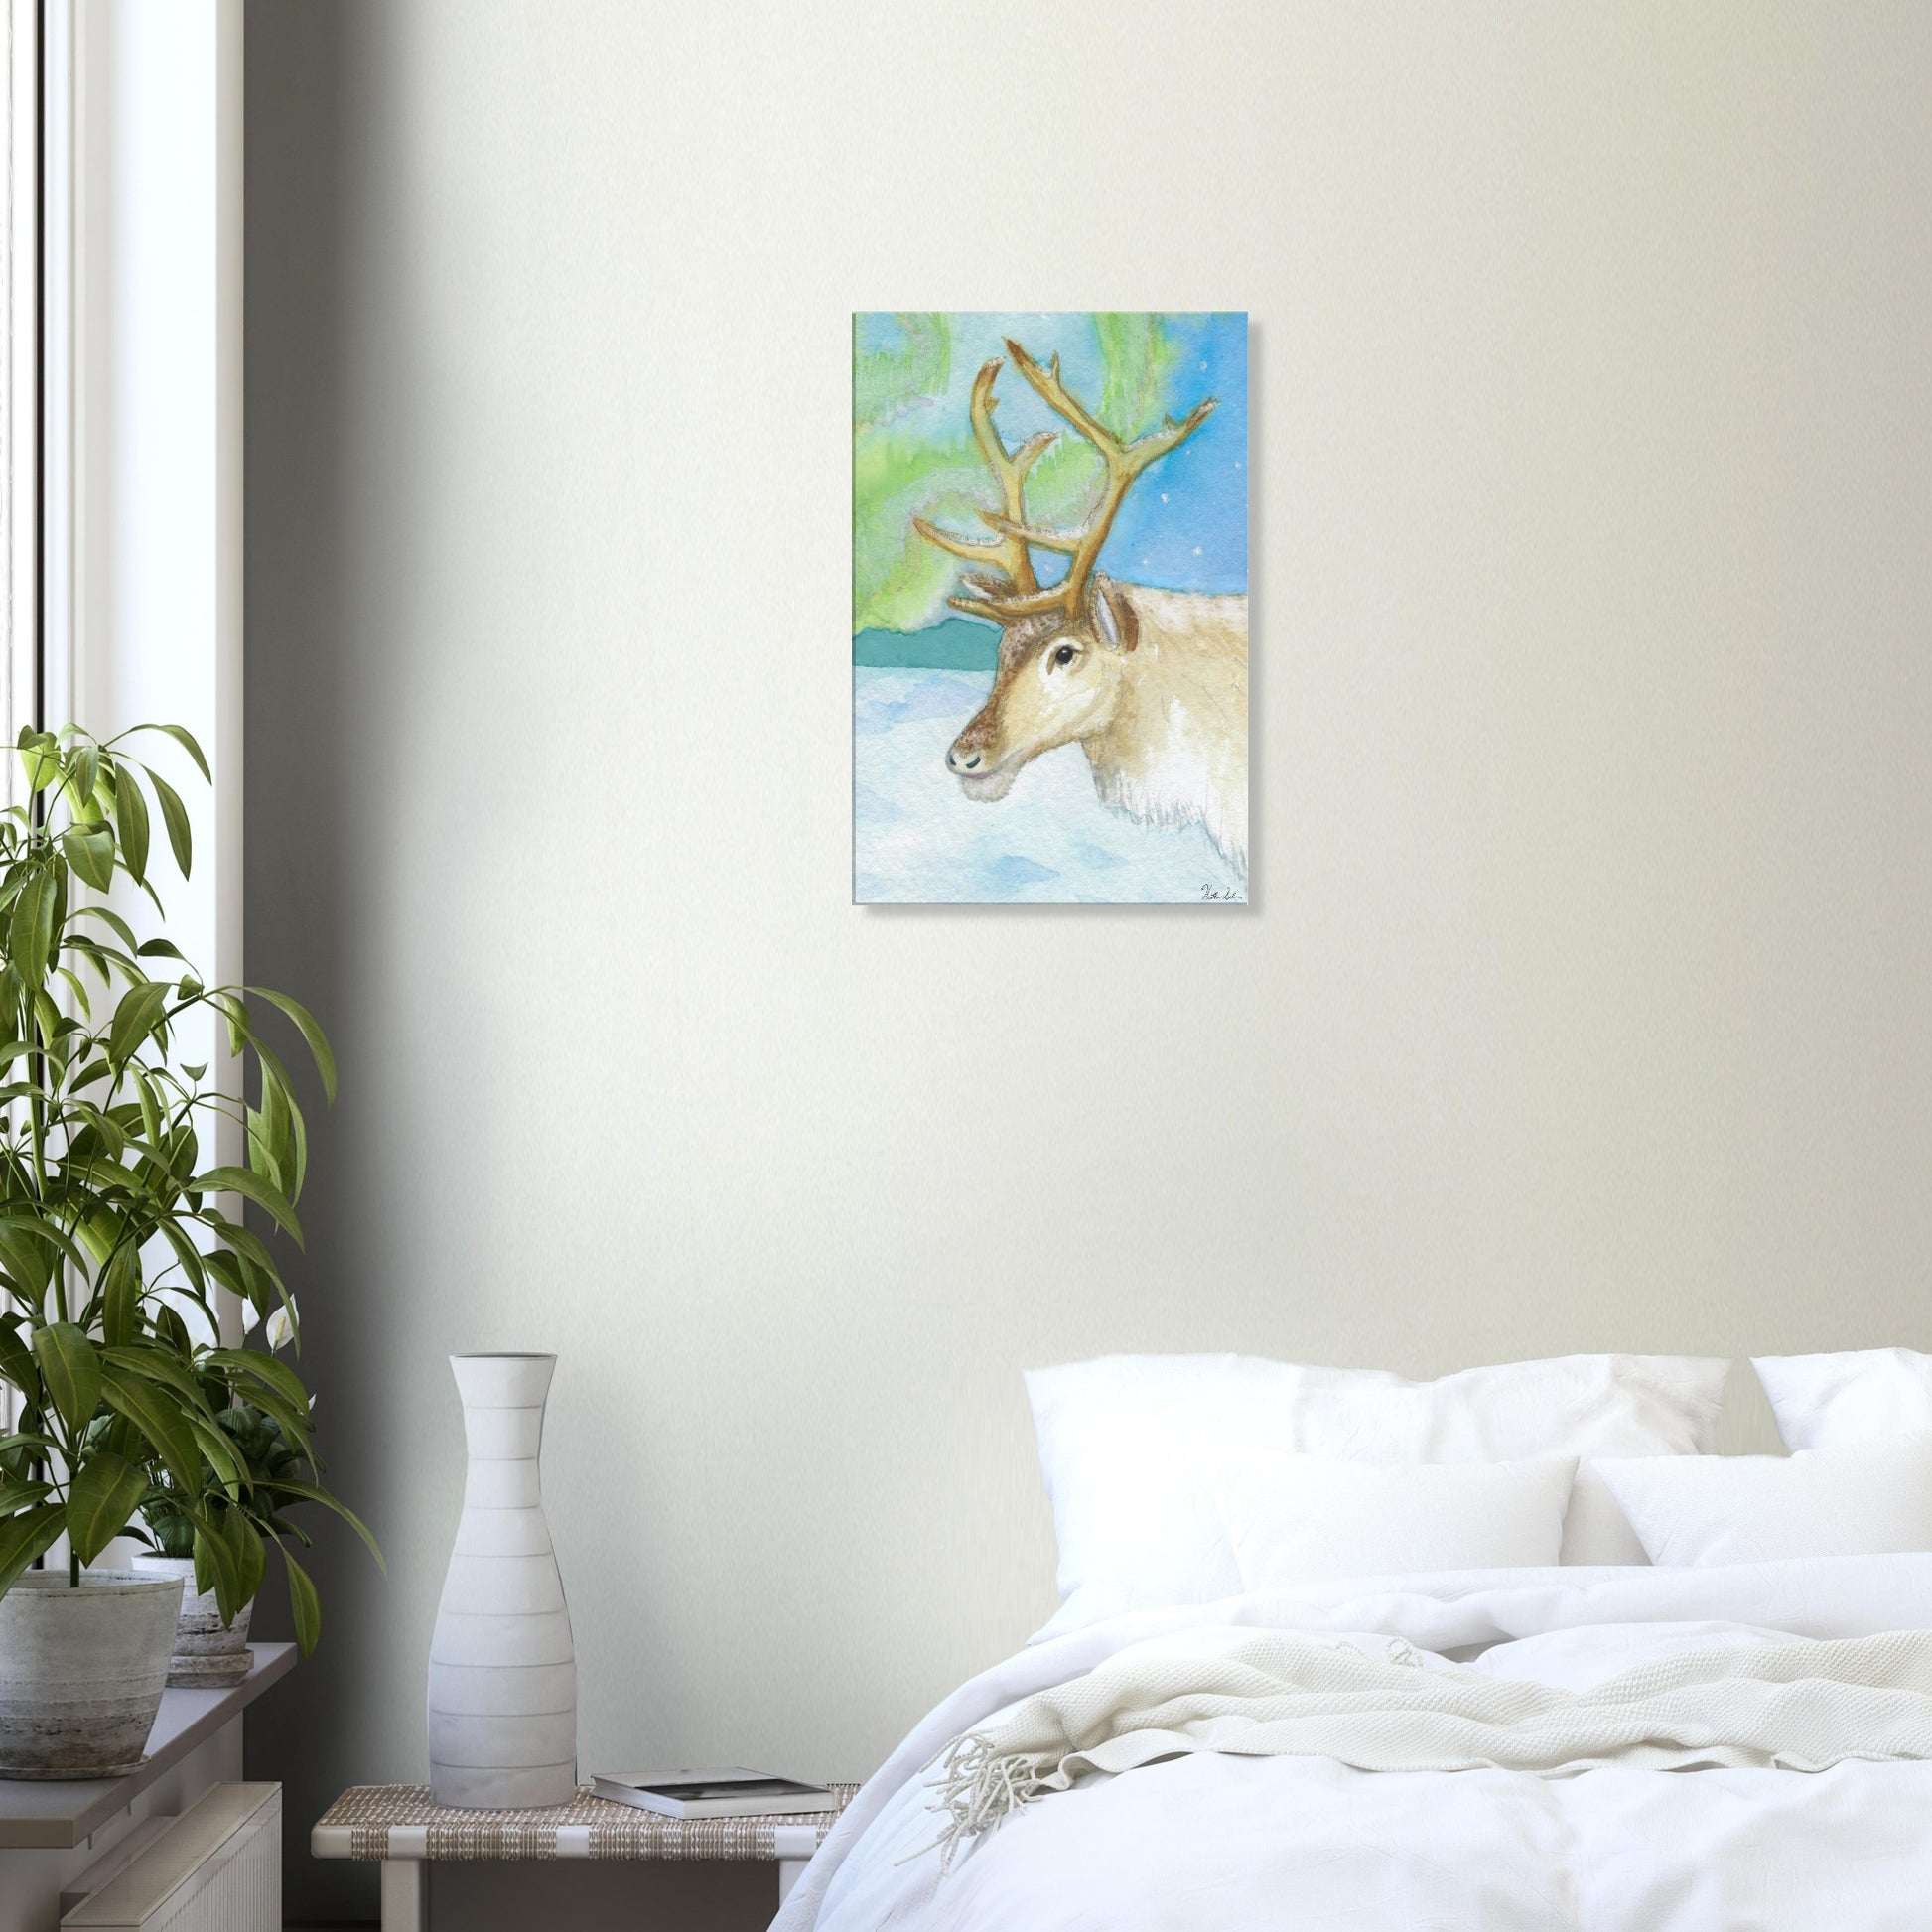 16 by 24 inch slim canvas print of Heather Silver's watercolor painting, northern lights reindeer. Shown on wall above white bed and nightstand.